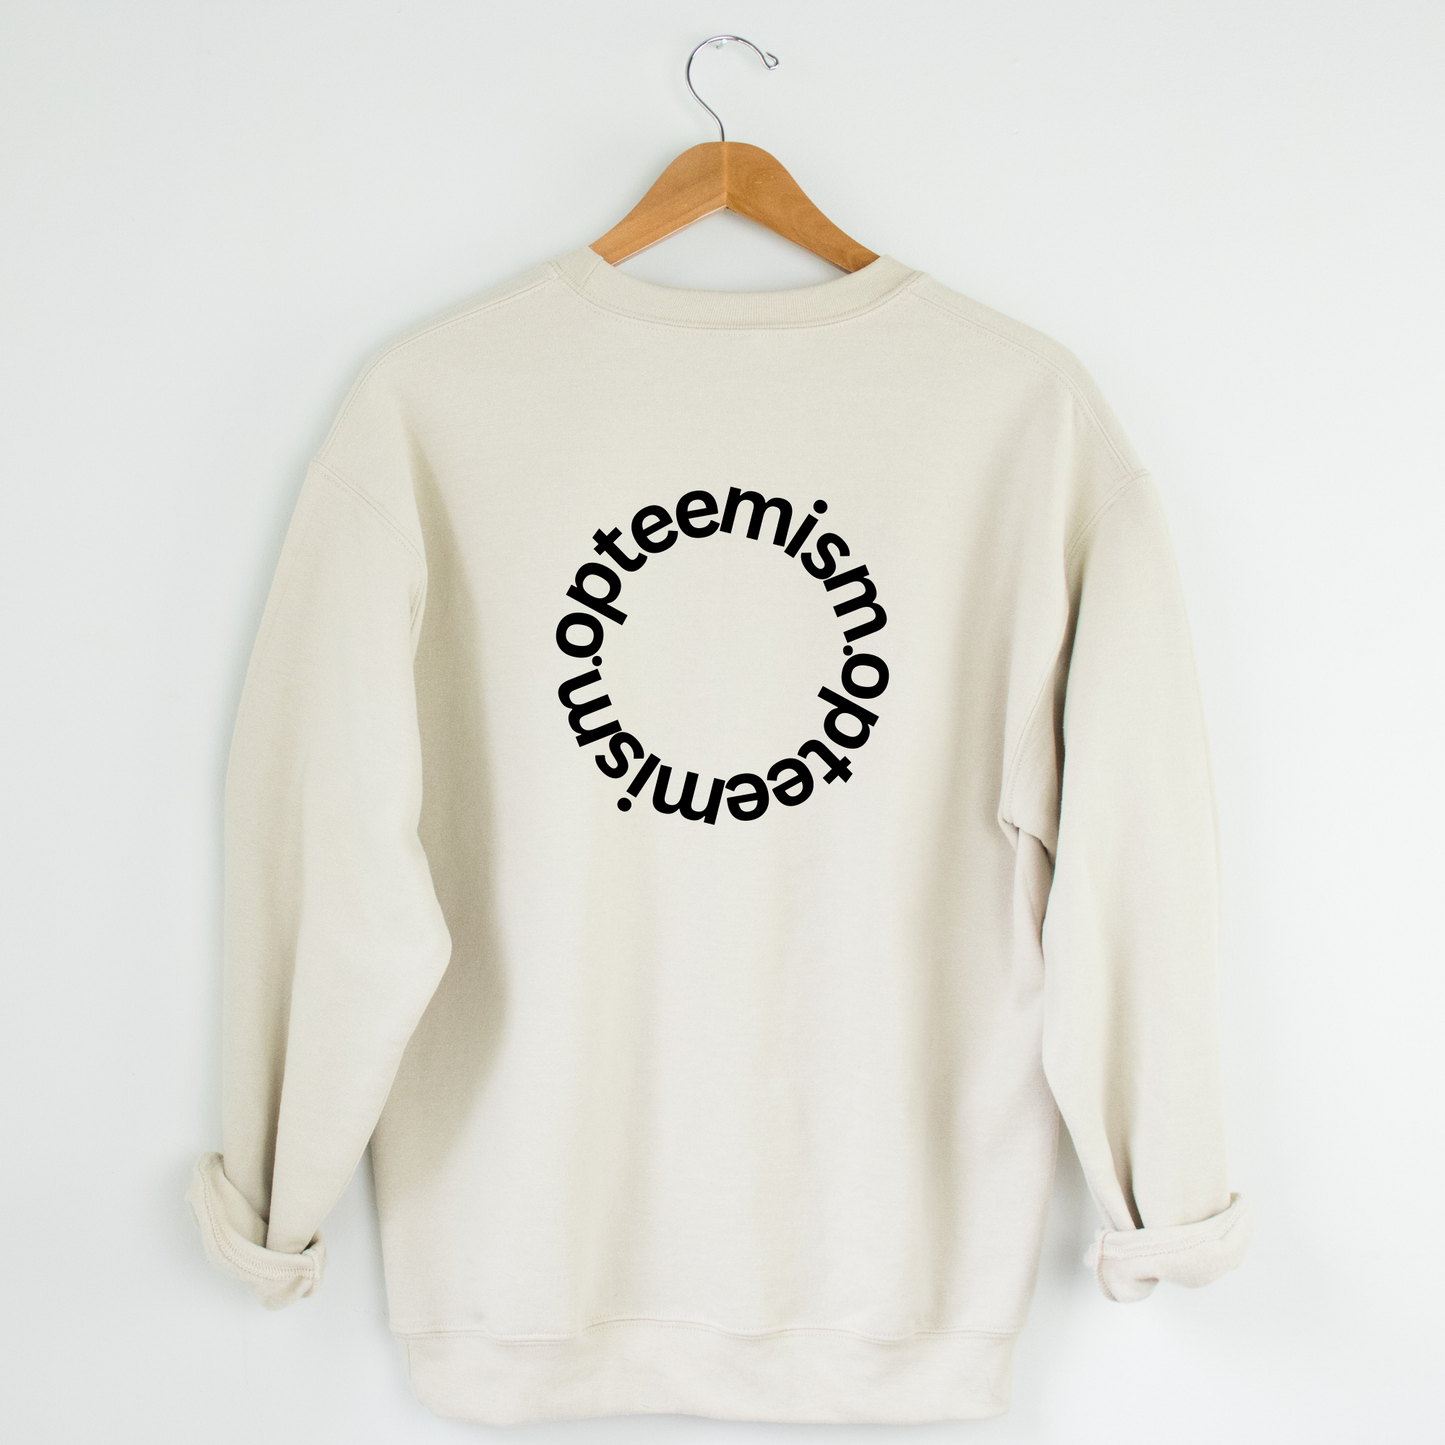 Beauty In Every Shade Crew Neck Graphic Sweater